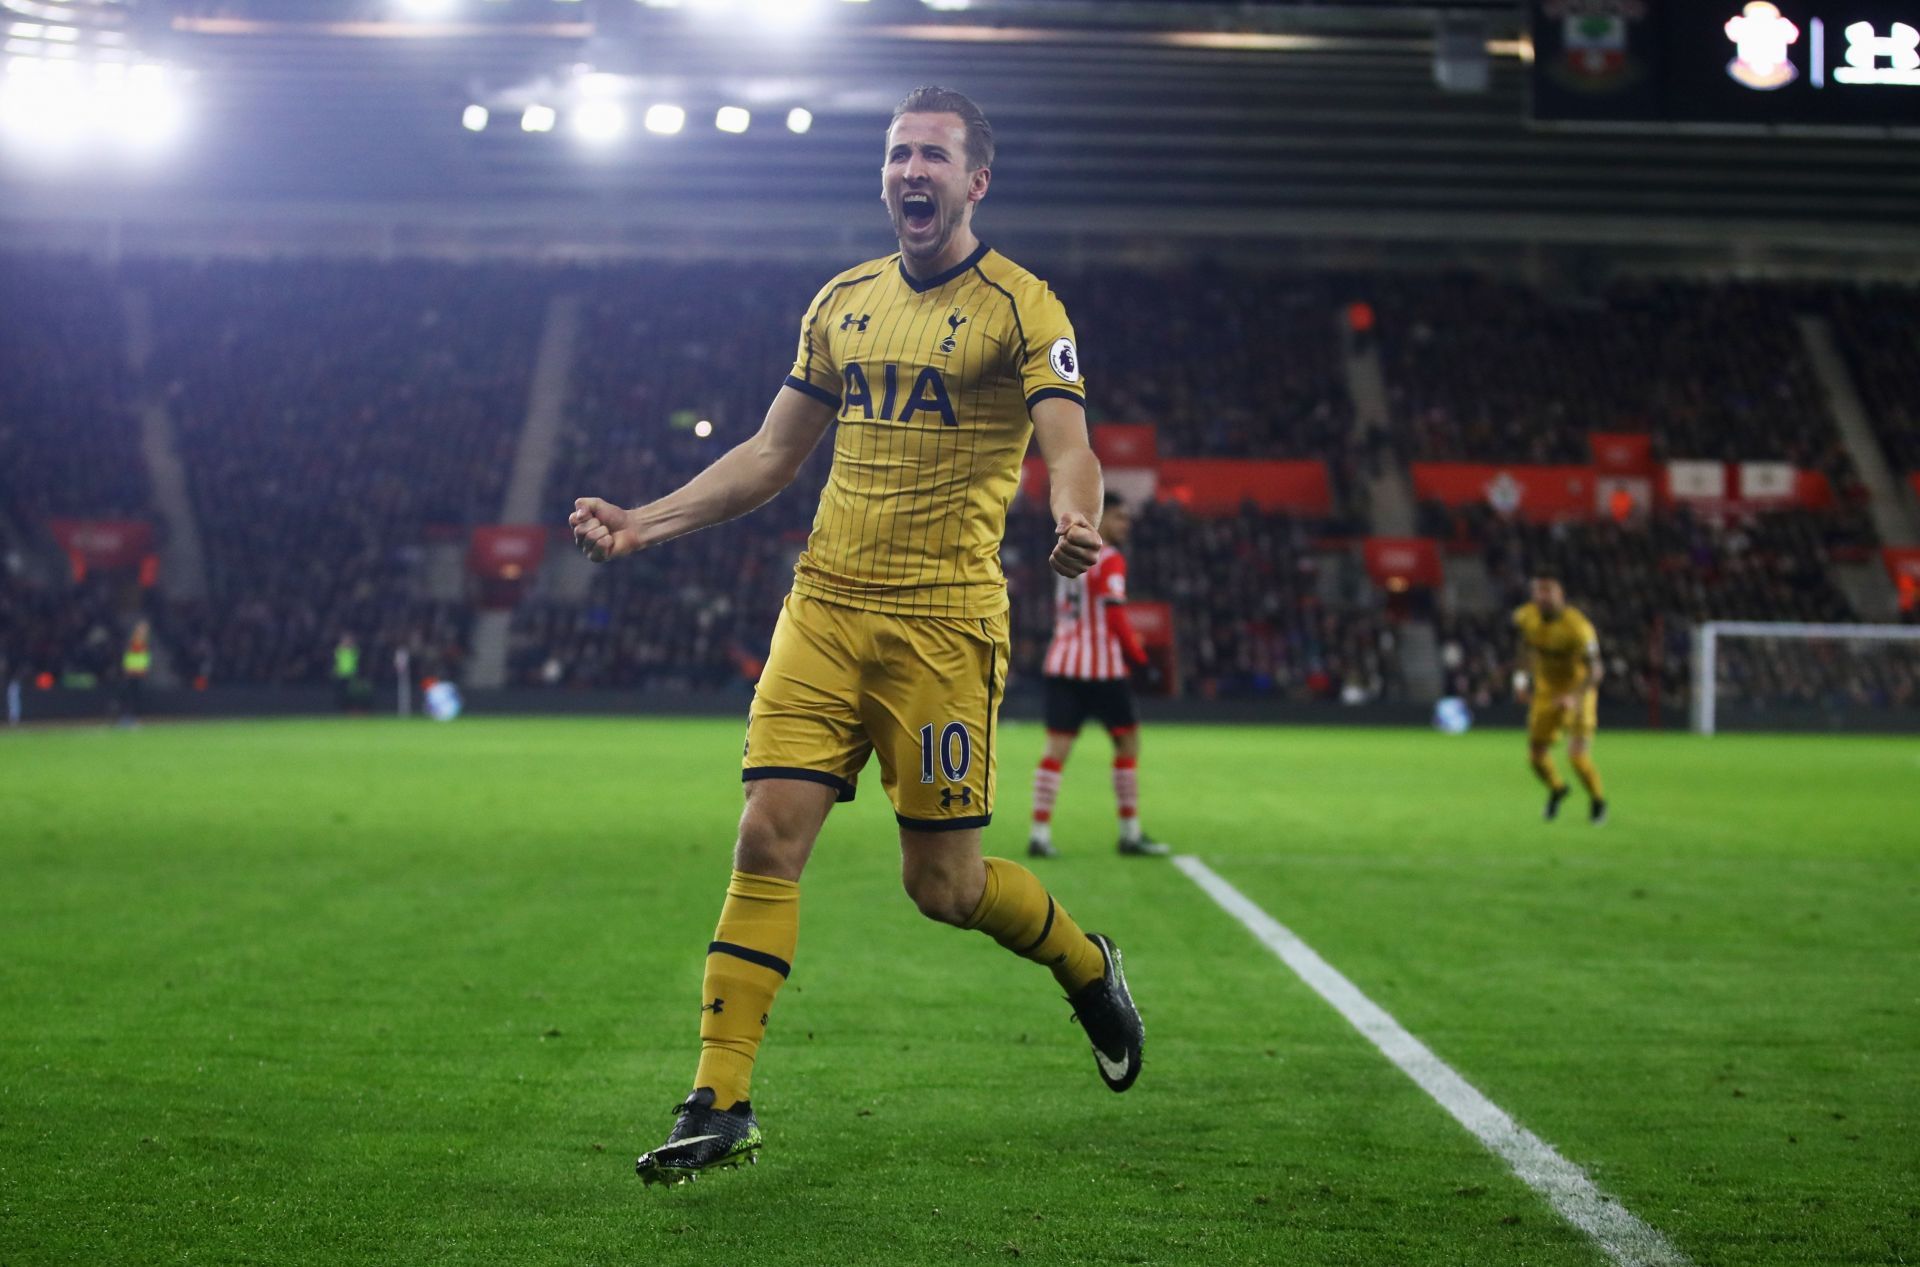 Harry Kane is already one of the greatest Premier League strikers of all-time.